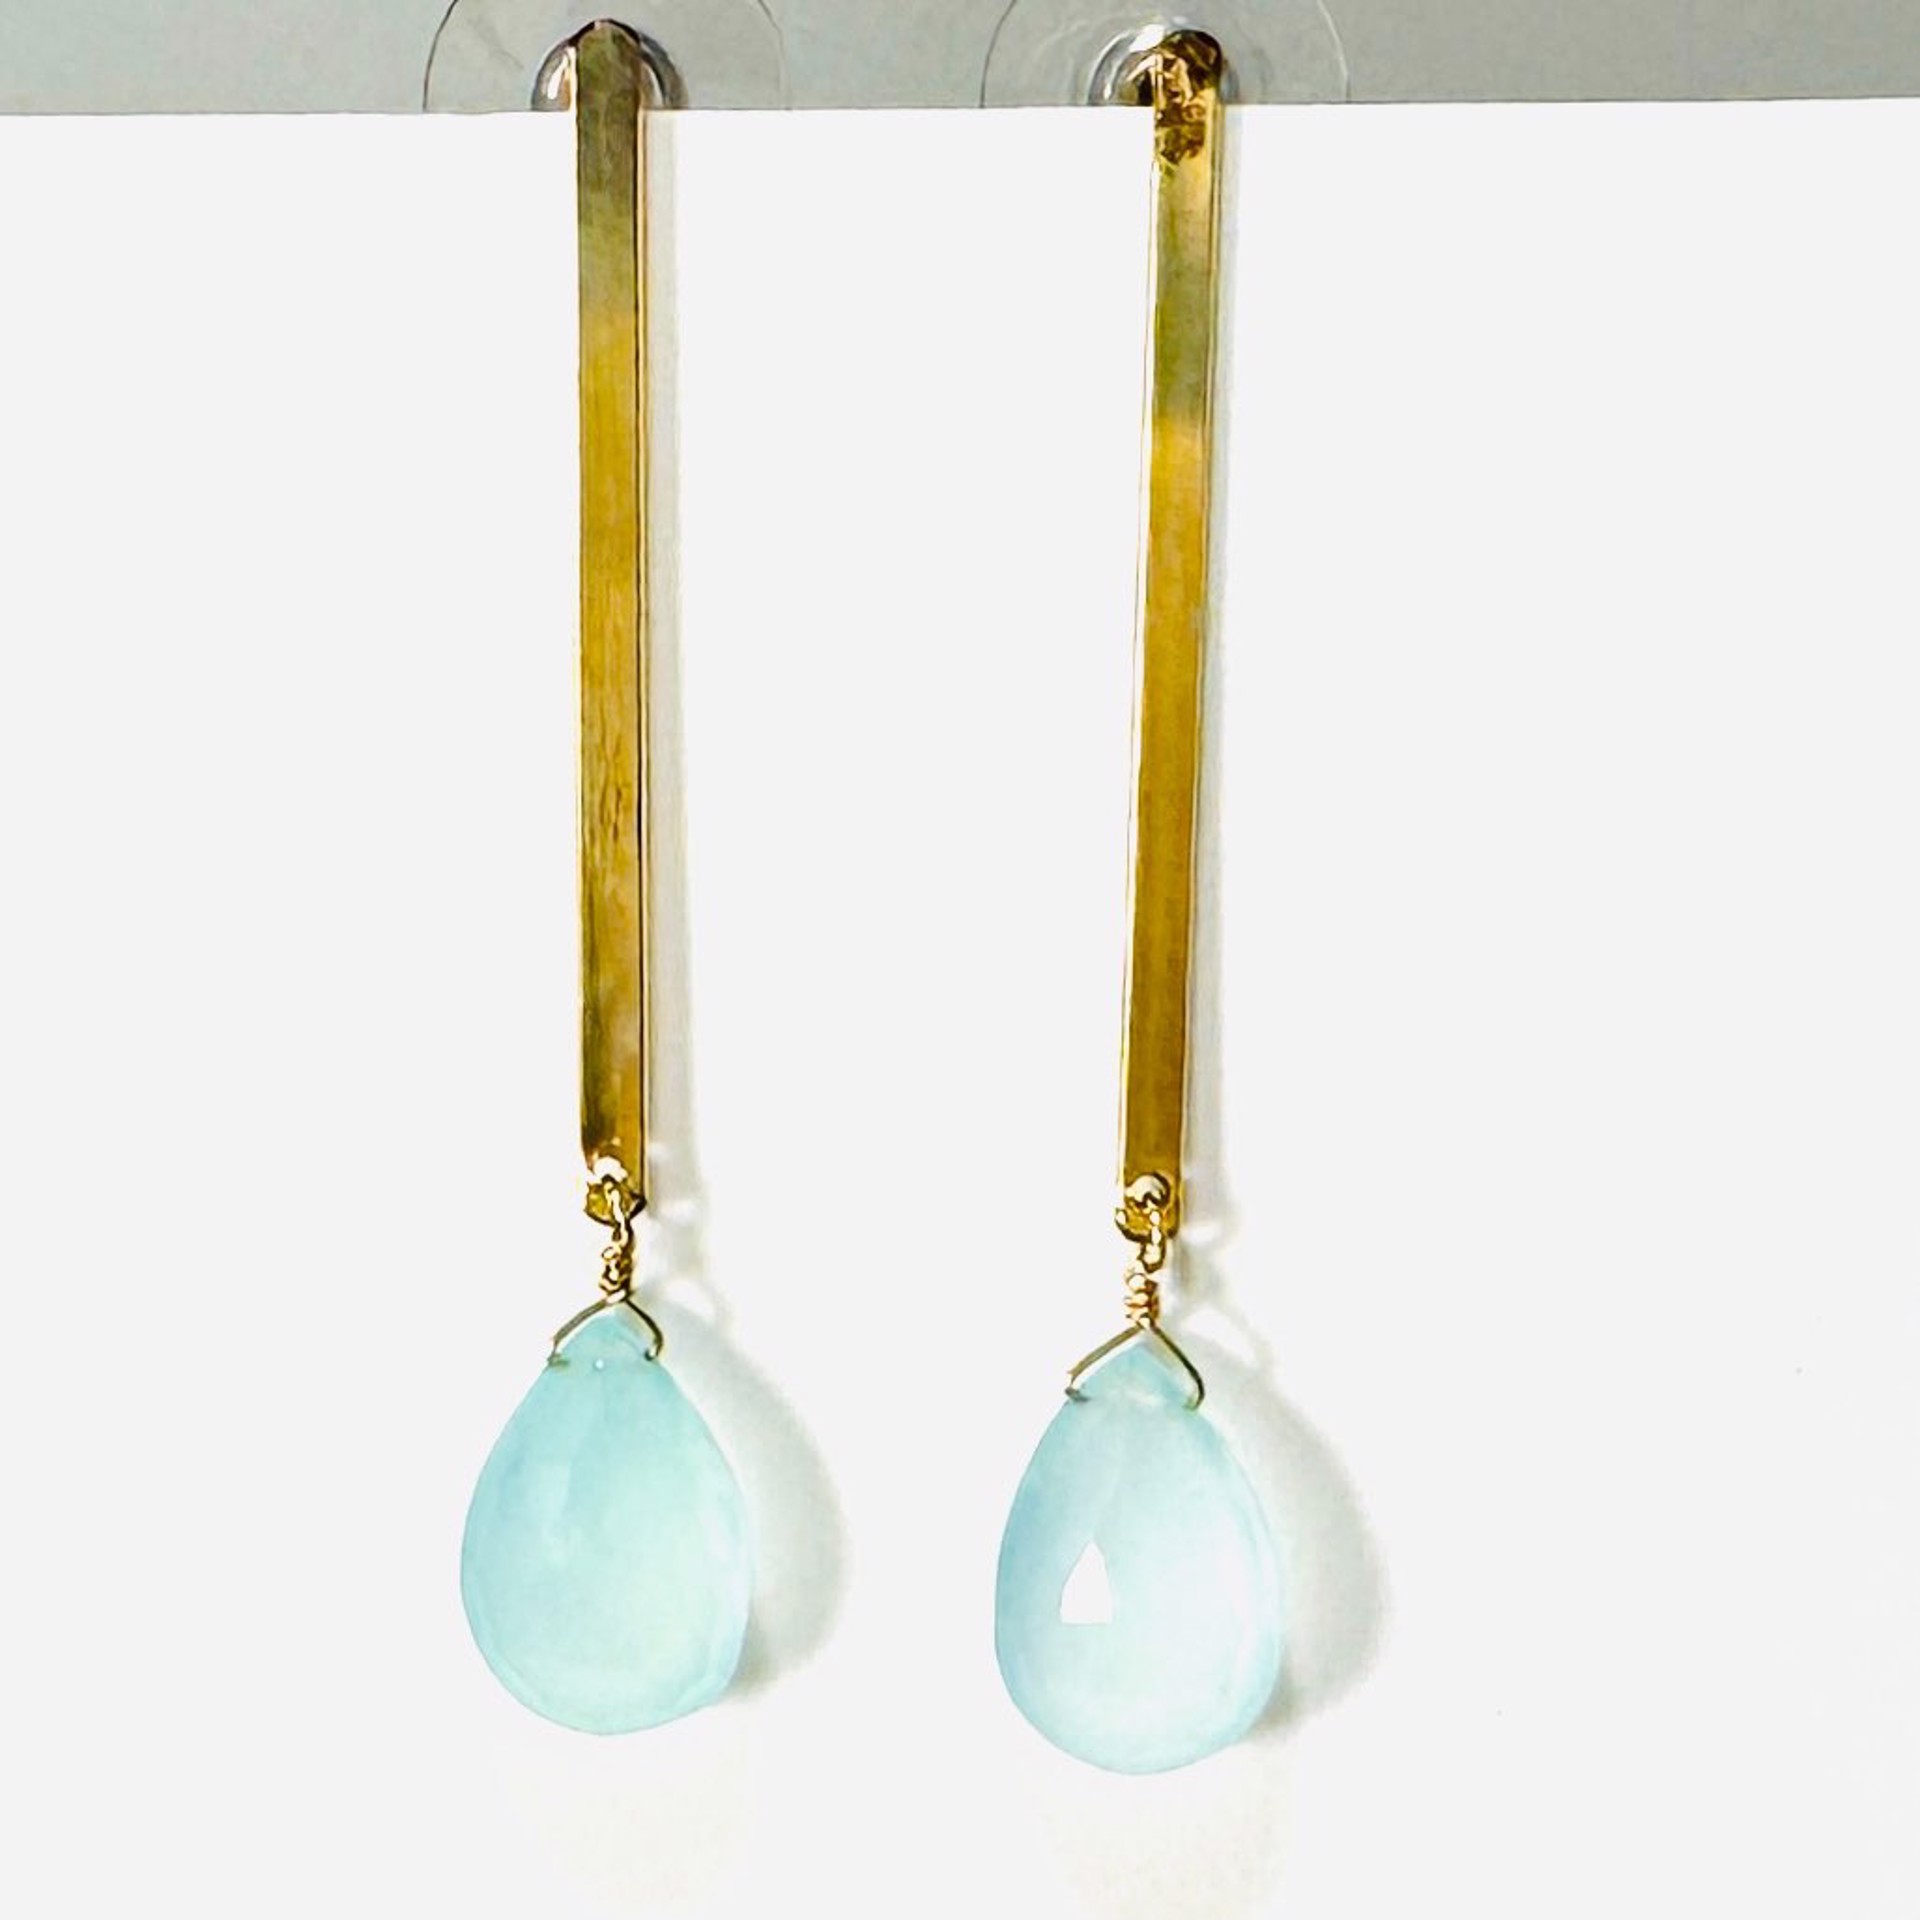 Chalcedony Drops on GF Bar, Post Earrings LR24-18 by Legare Riano